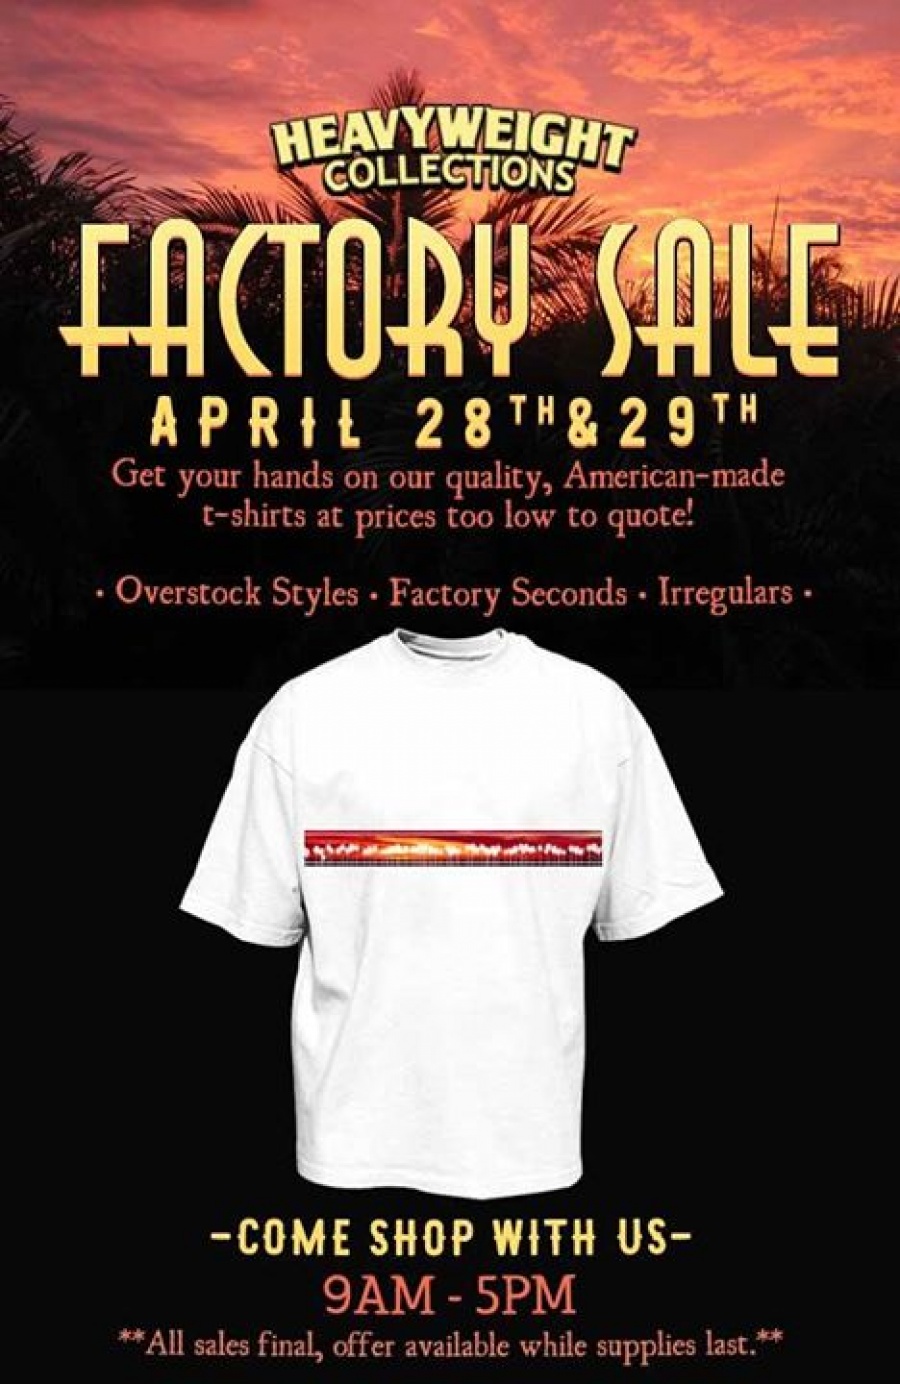 Heavyweight Collections Inc. Warehouse Faactory Sale (t-shirts)